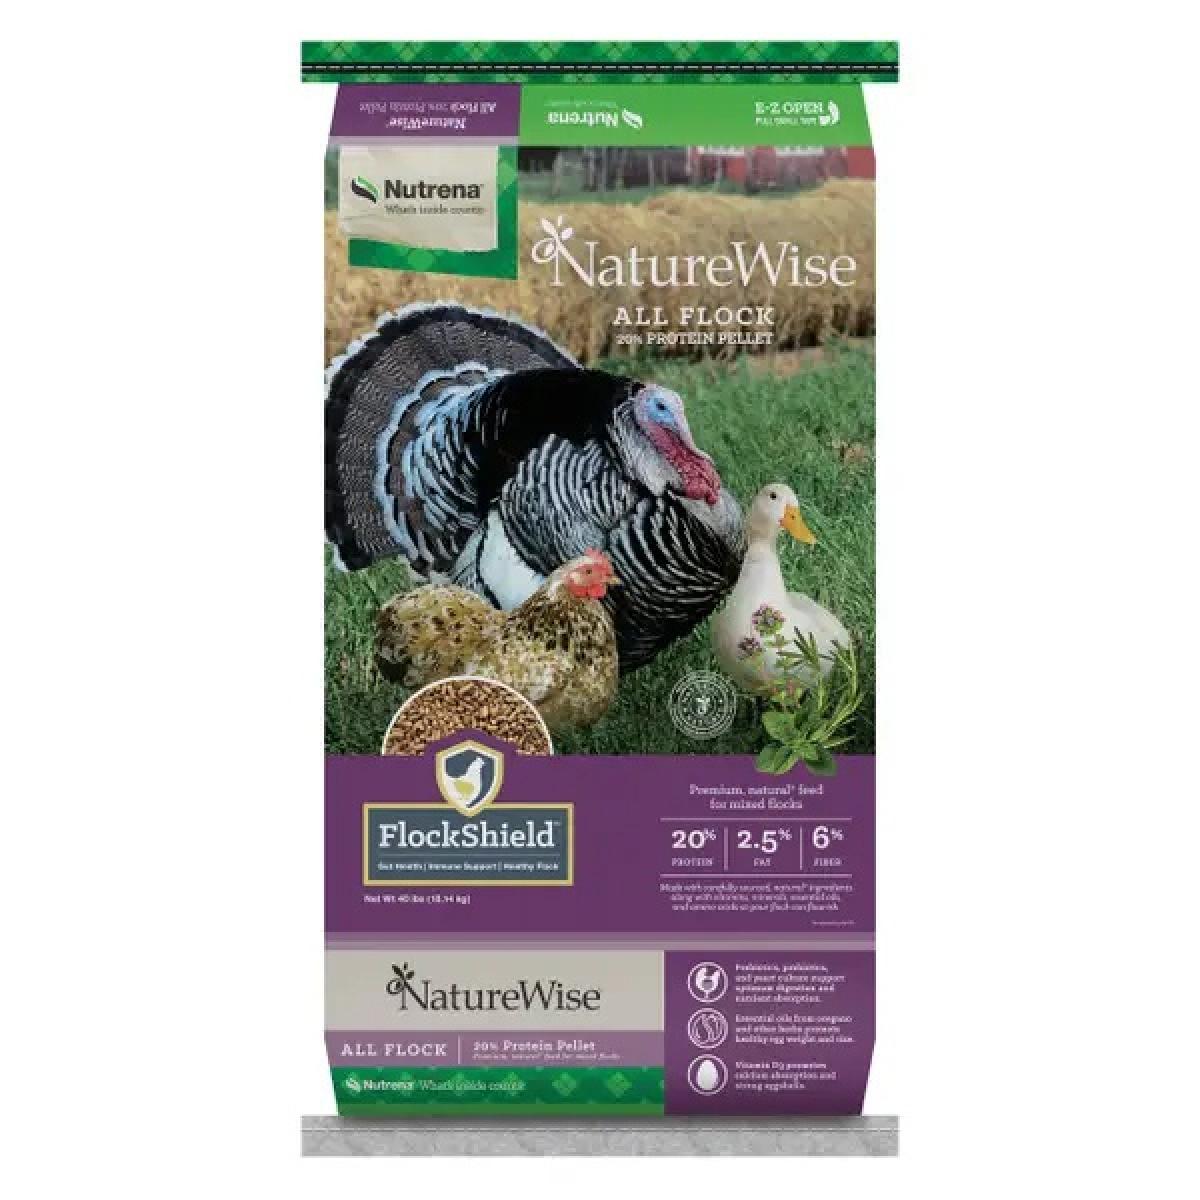 Nutrena NatureWise All Flock 20% Crumble